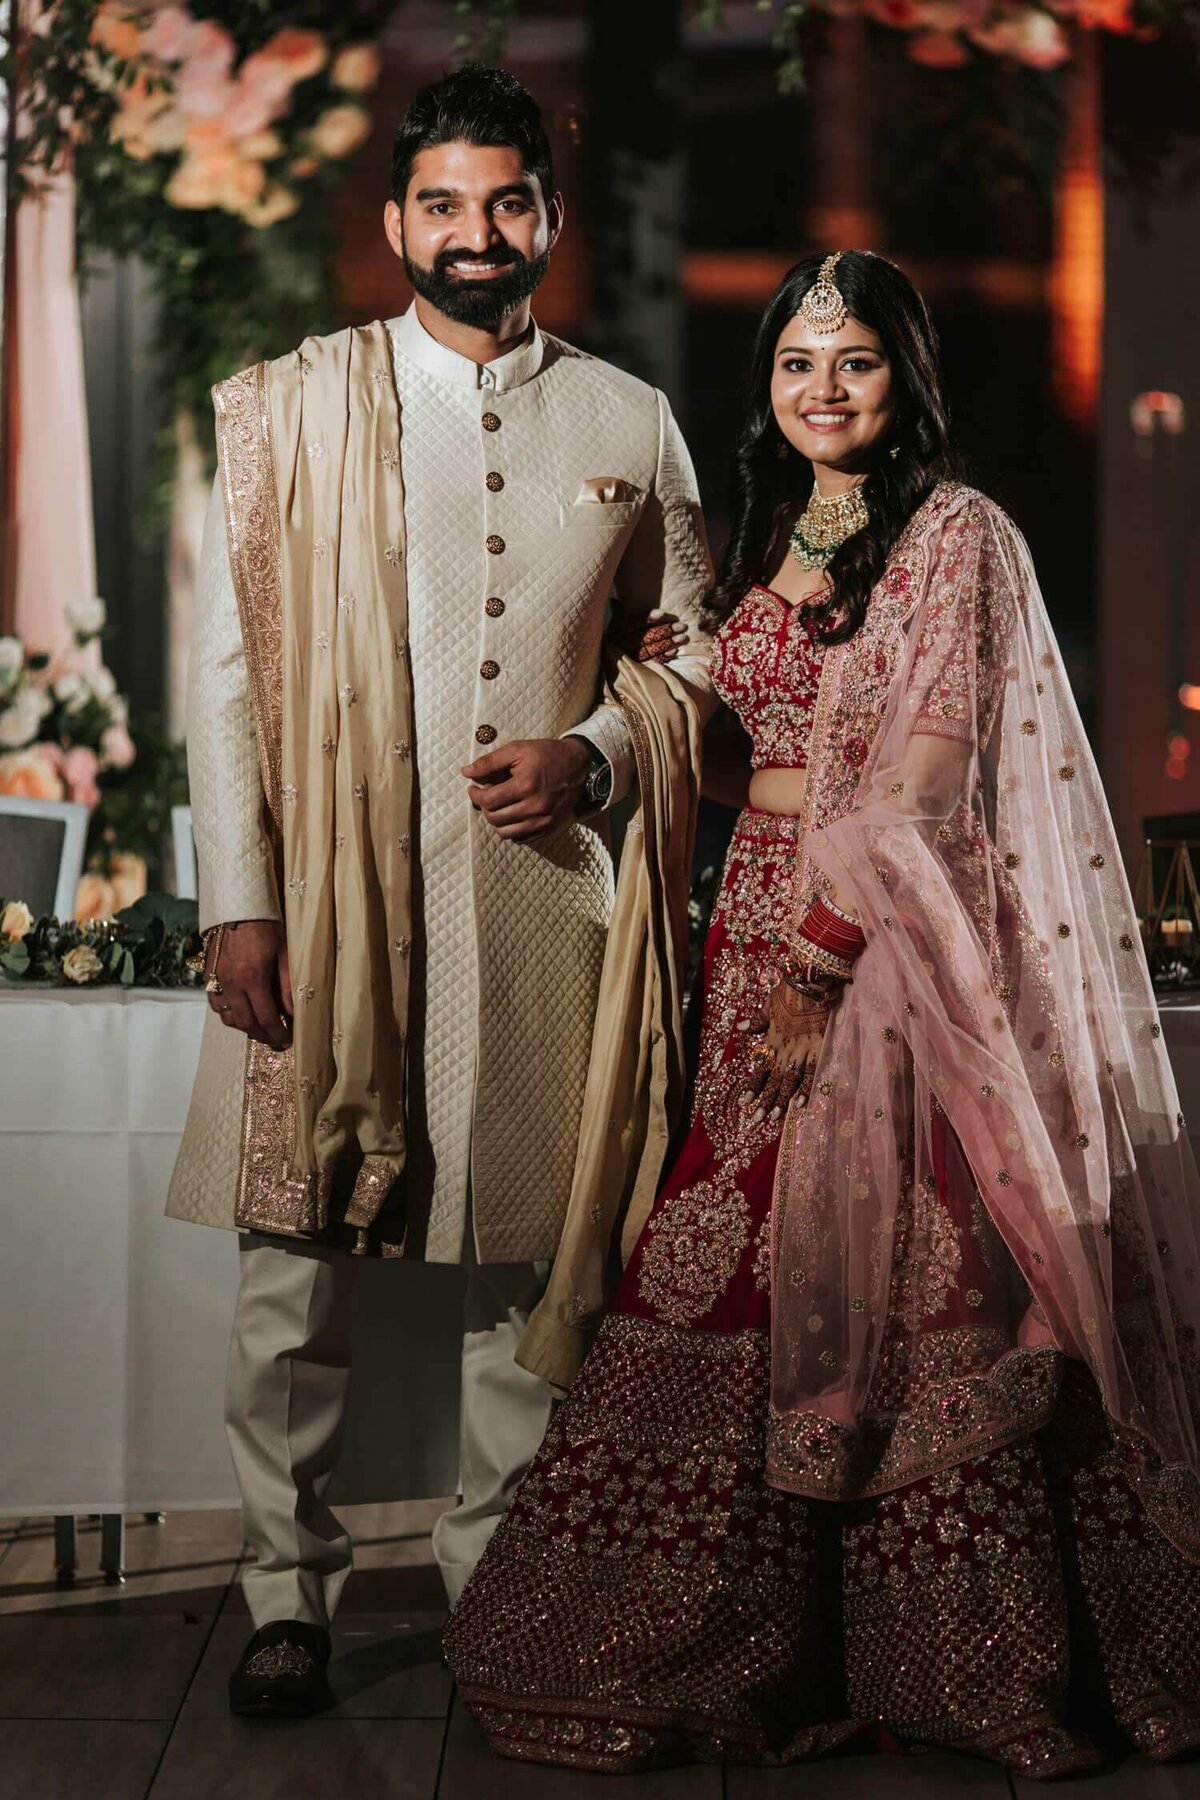 New Jersey Indian Wedding Photography. Bride and groom on wedding day during portraits.